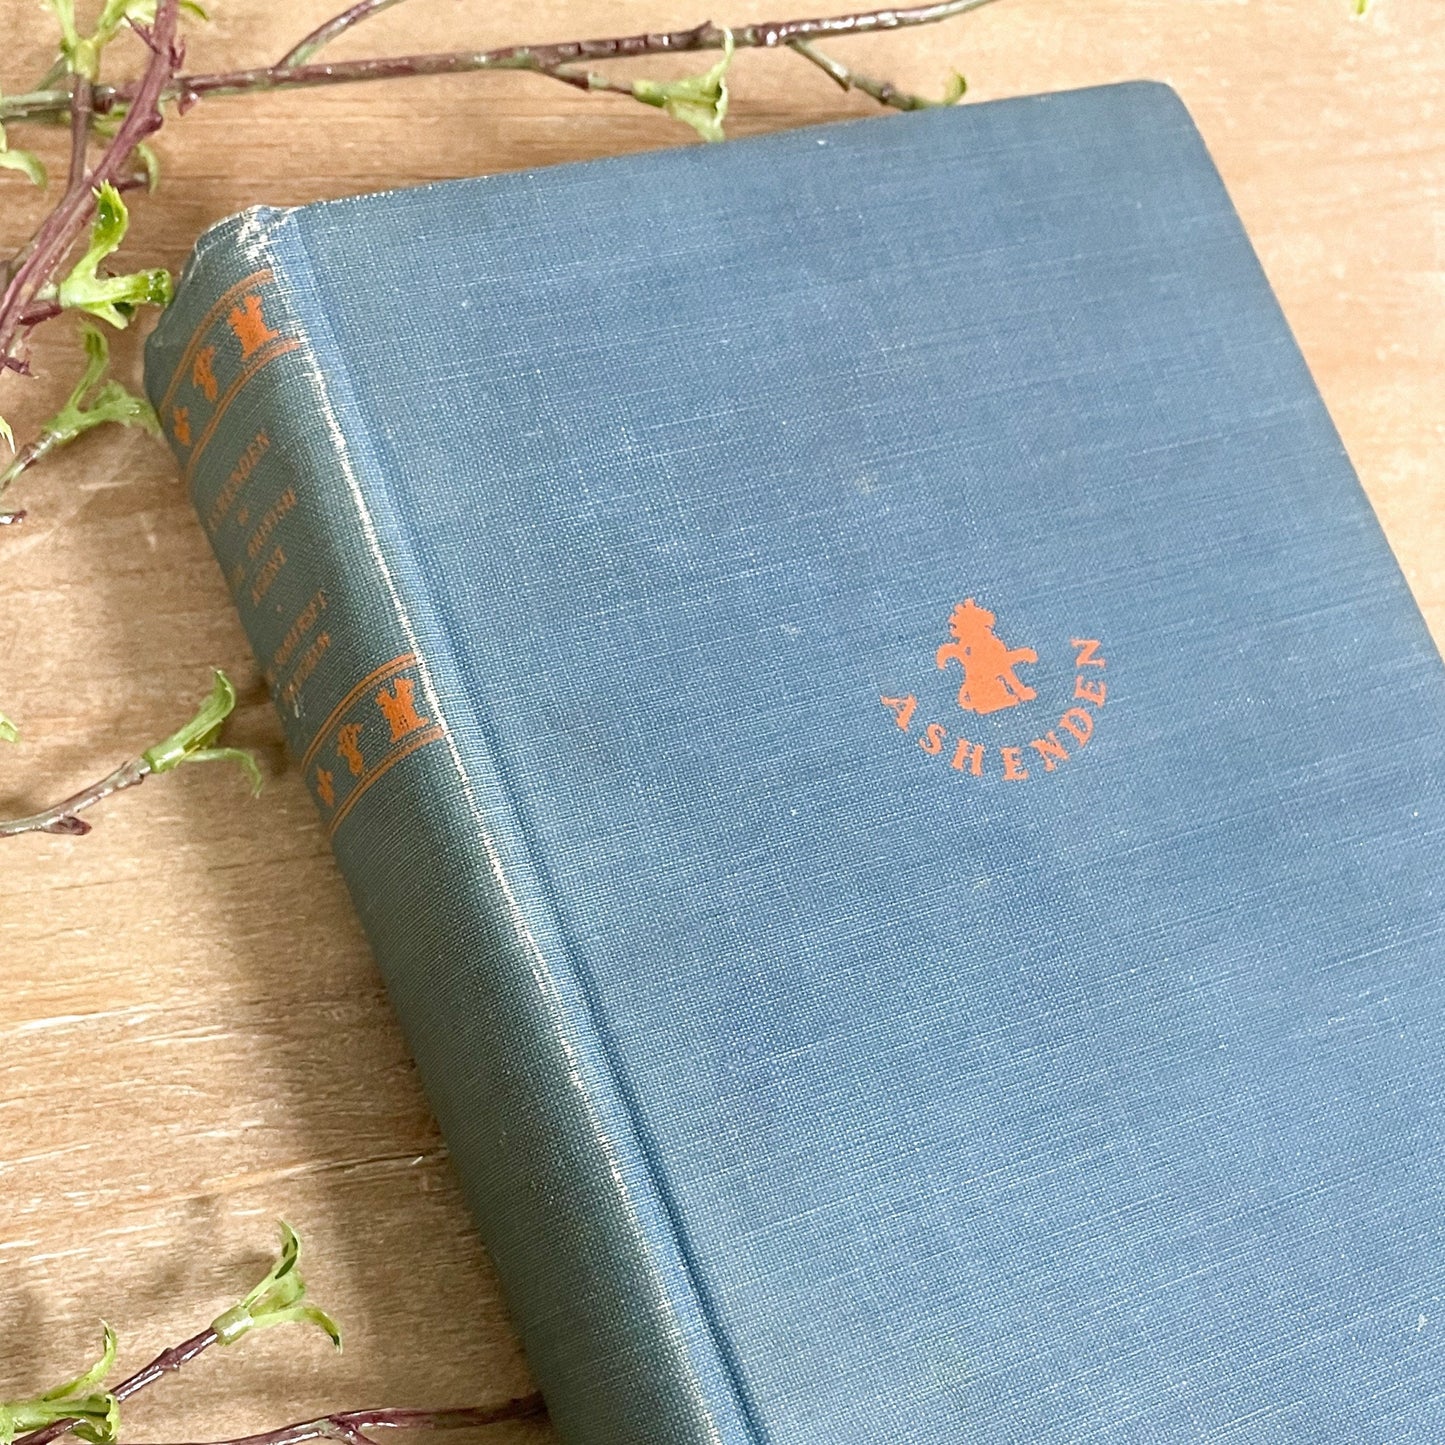 Vintage Maugham Book, Ashenden or the The British Agent by W. Somerset Maugham